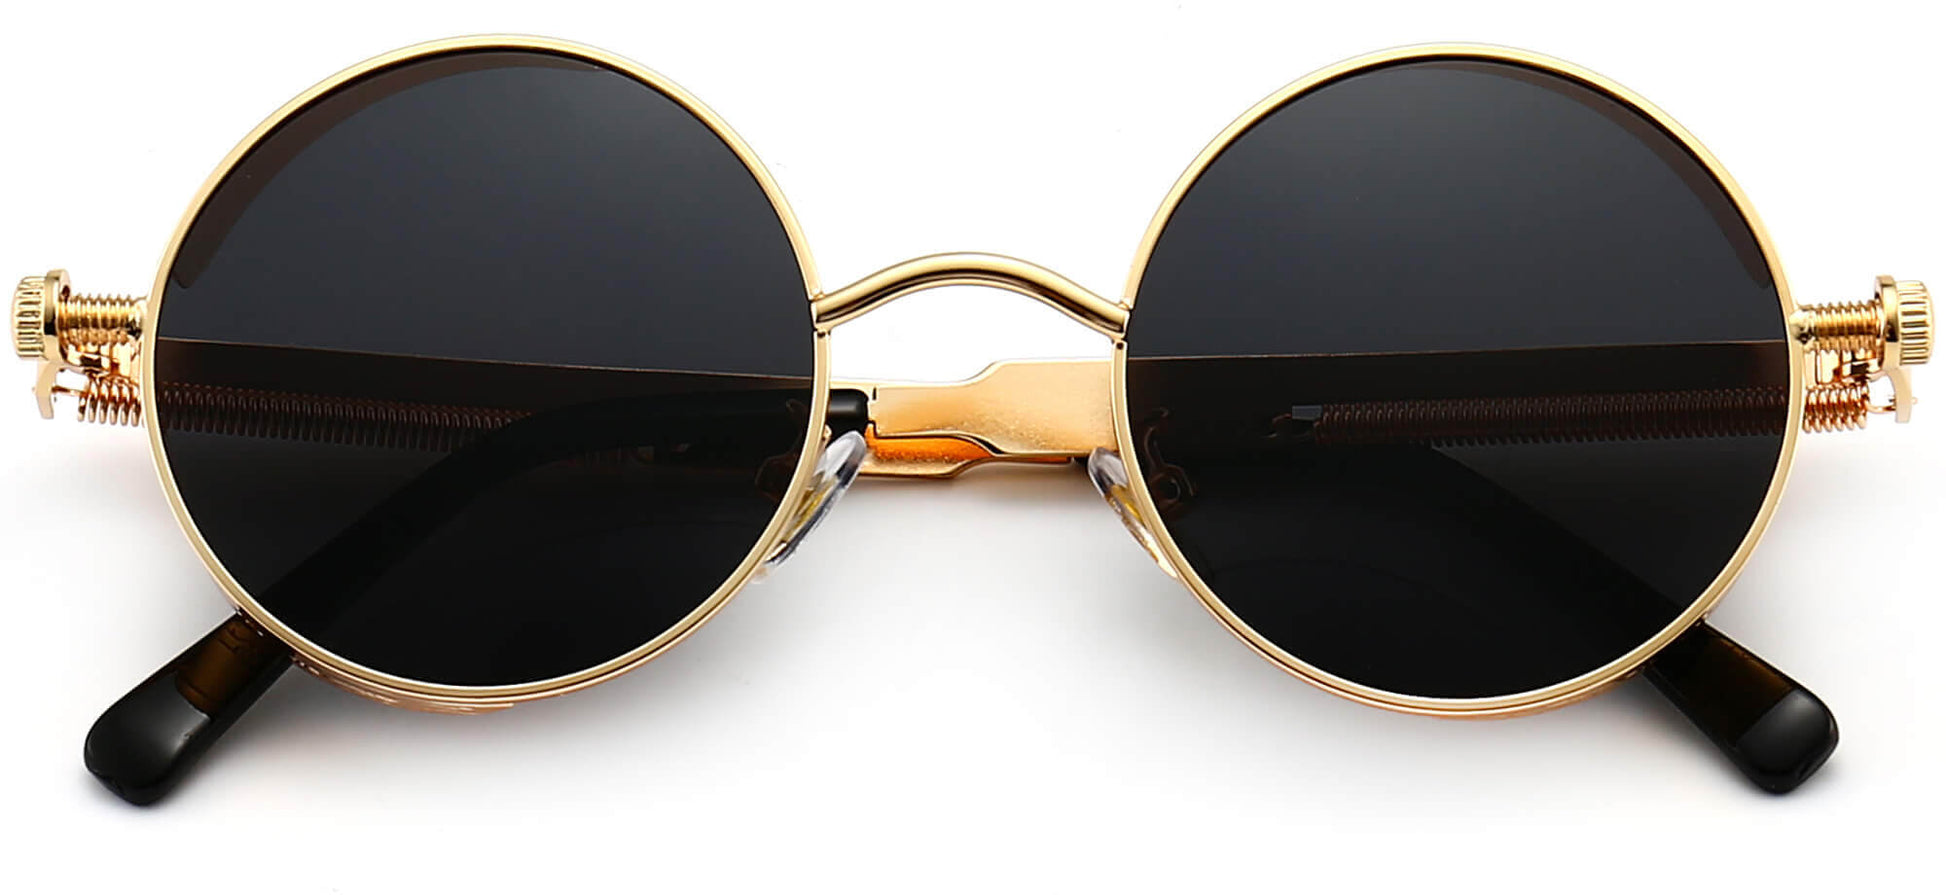 Gavin Gold Stainless steel Sunglasses from ANRRI, closed view